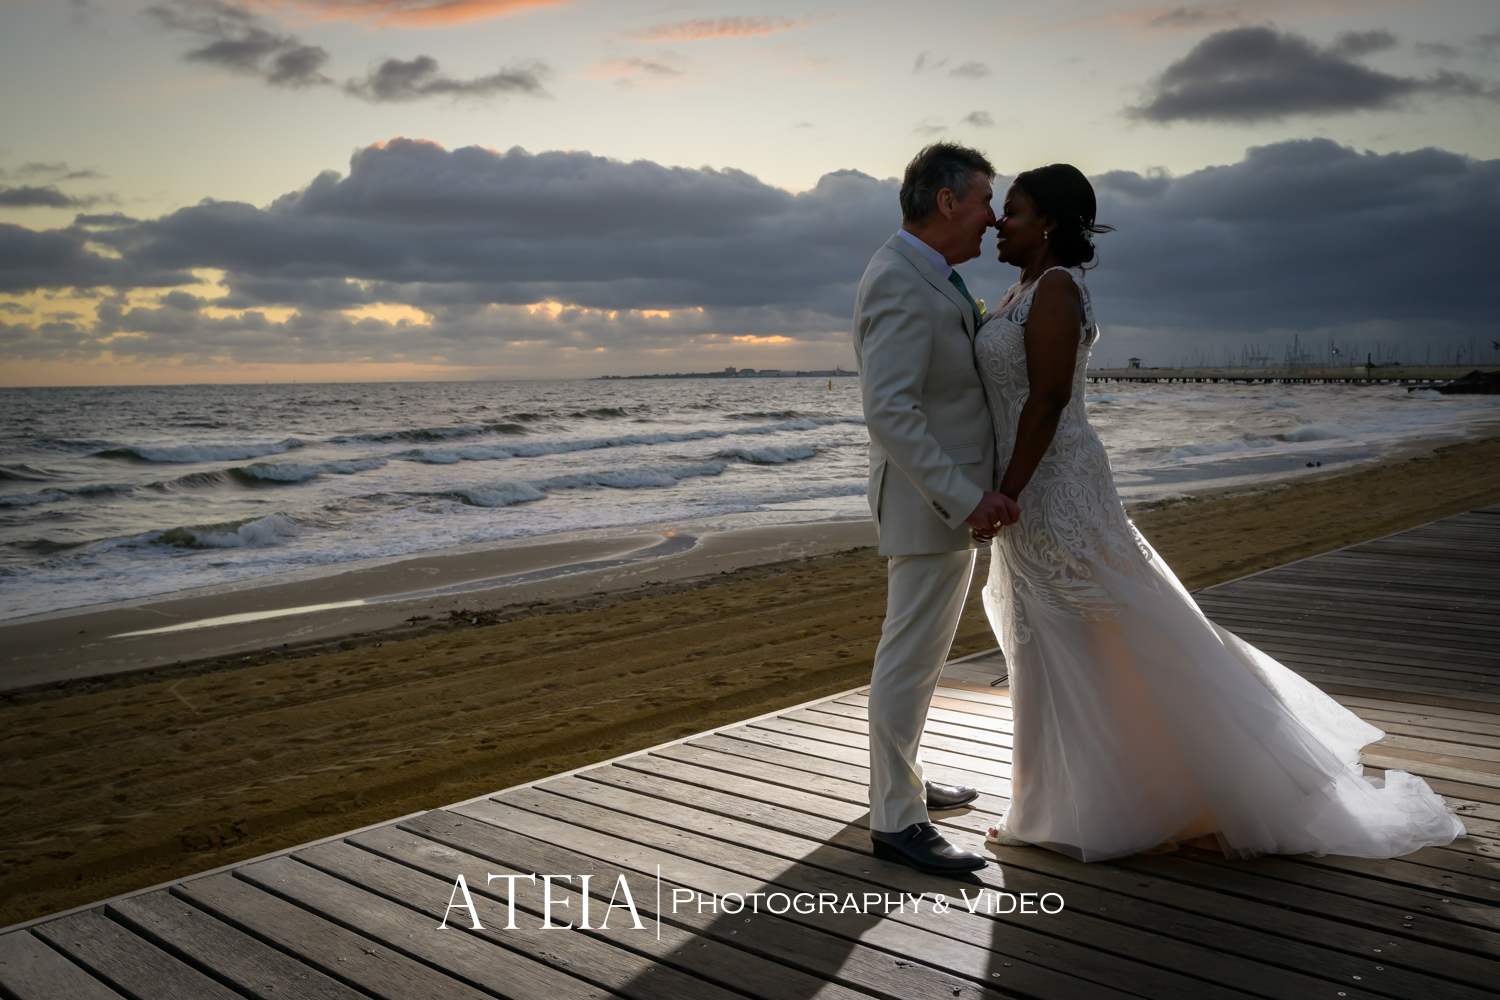 , Beatrice and Michael&#8217;s wedding photography at Encore St Kilda captured by ATEIA Photography &#038; Video